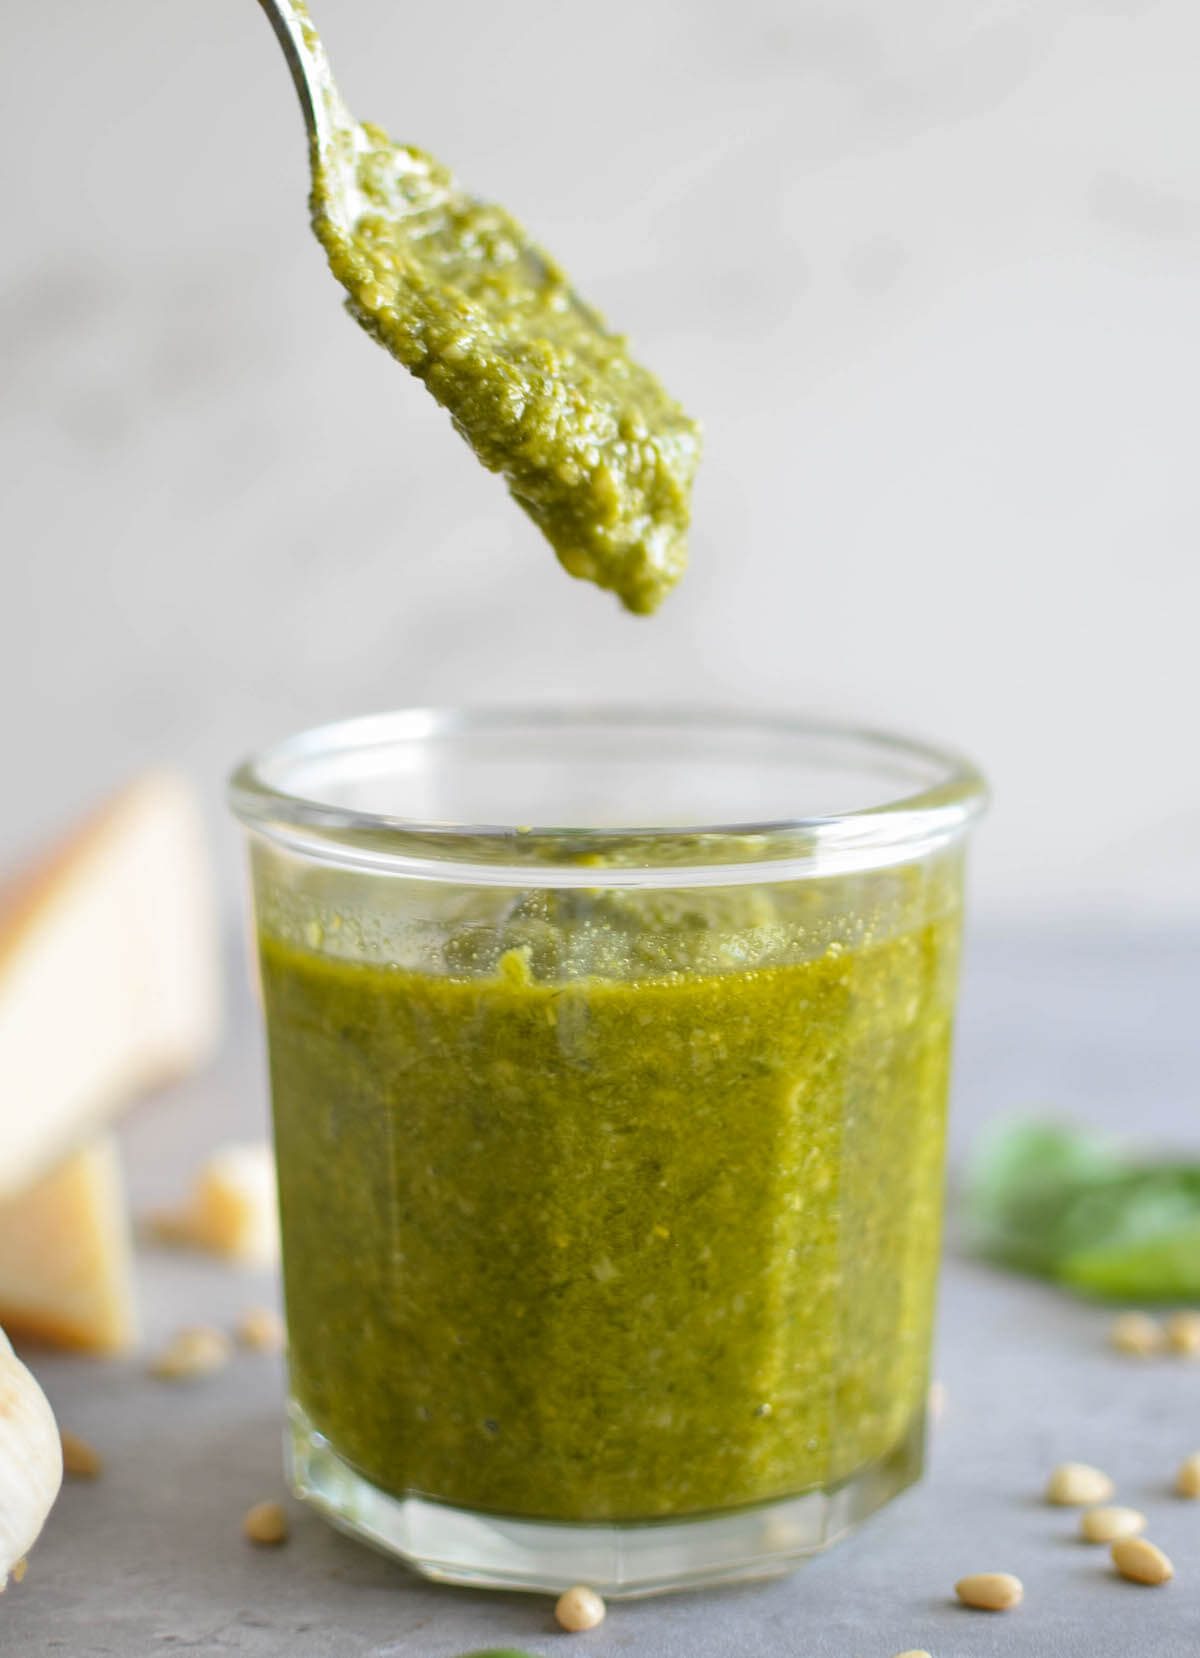 dripping pesto sauce from spoon into jar